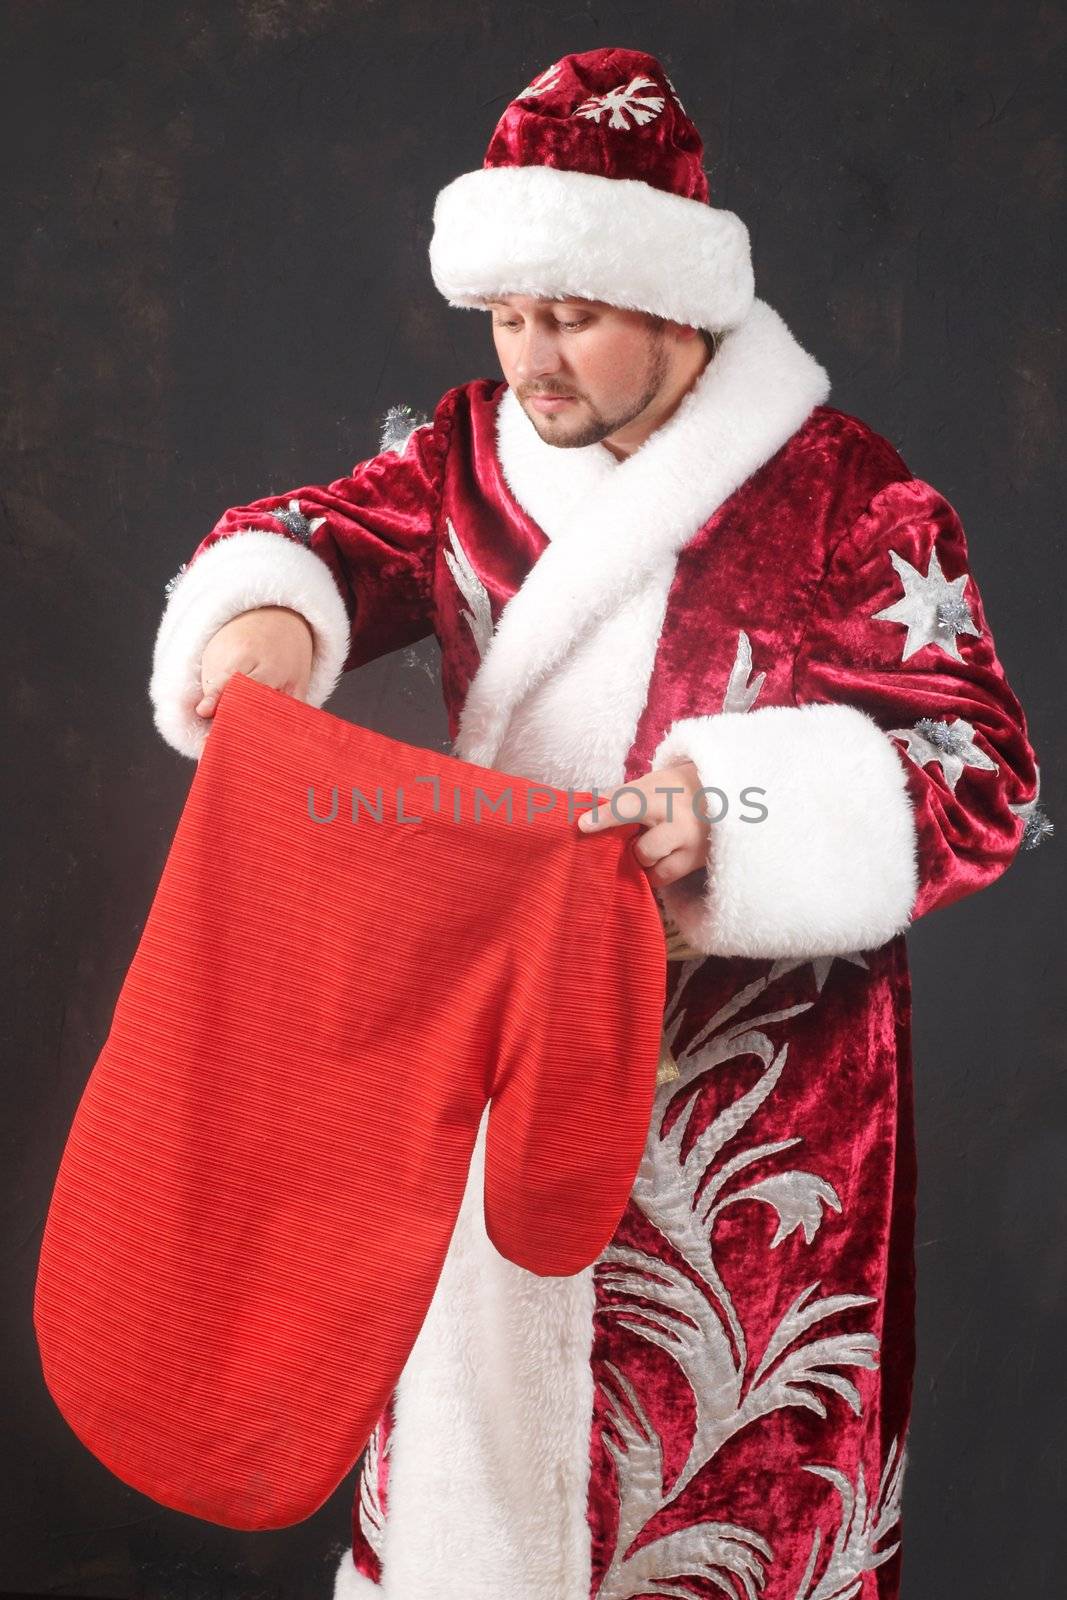 Santa Claus carrying a red bag with gifts